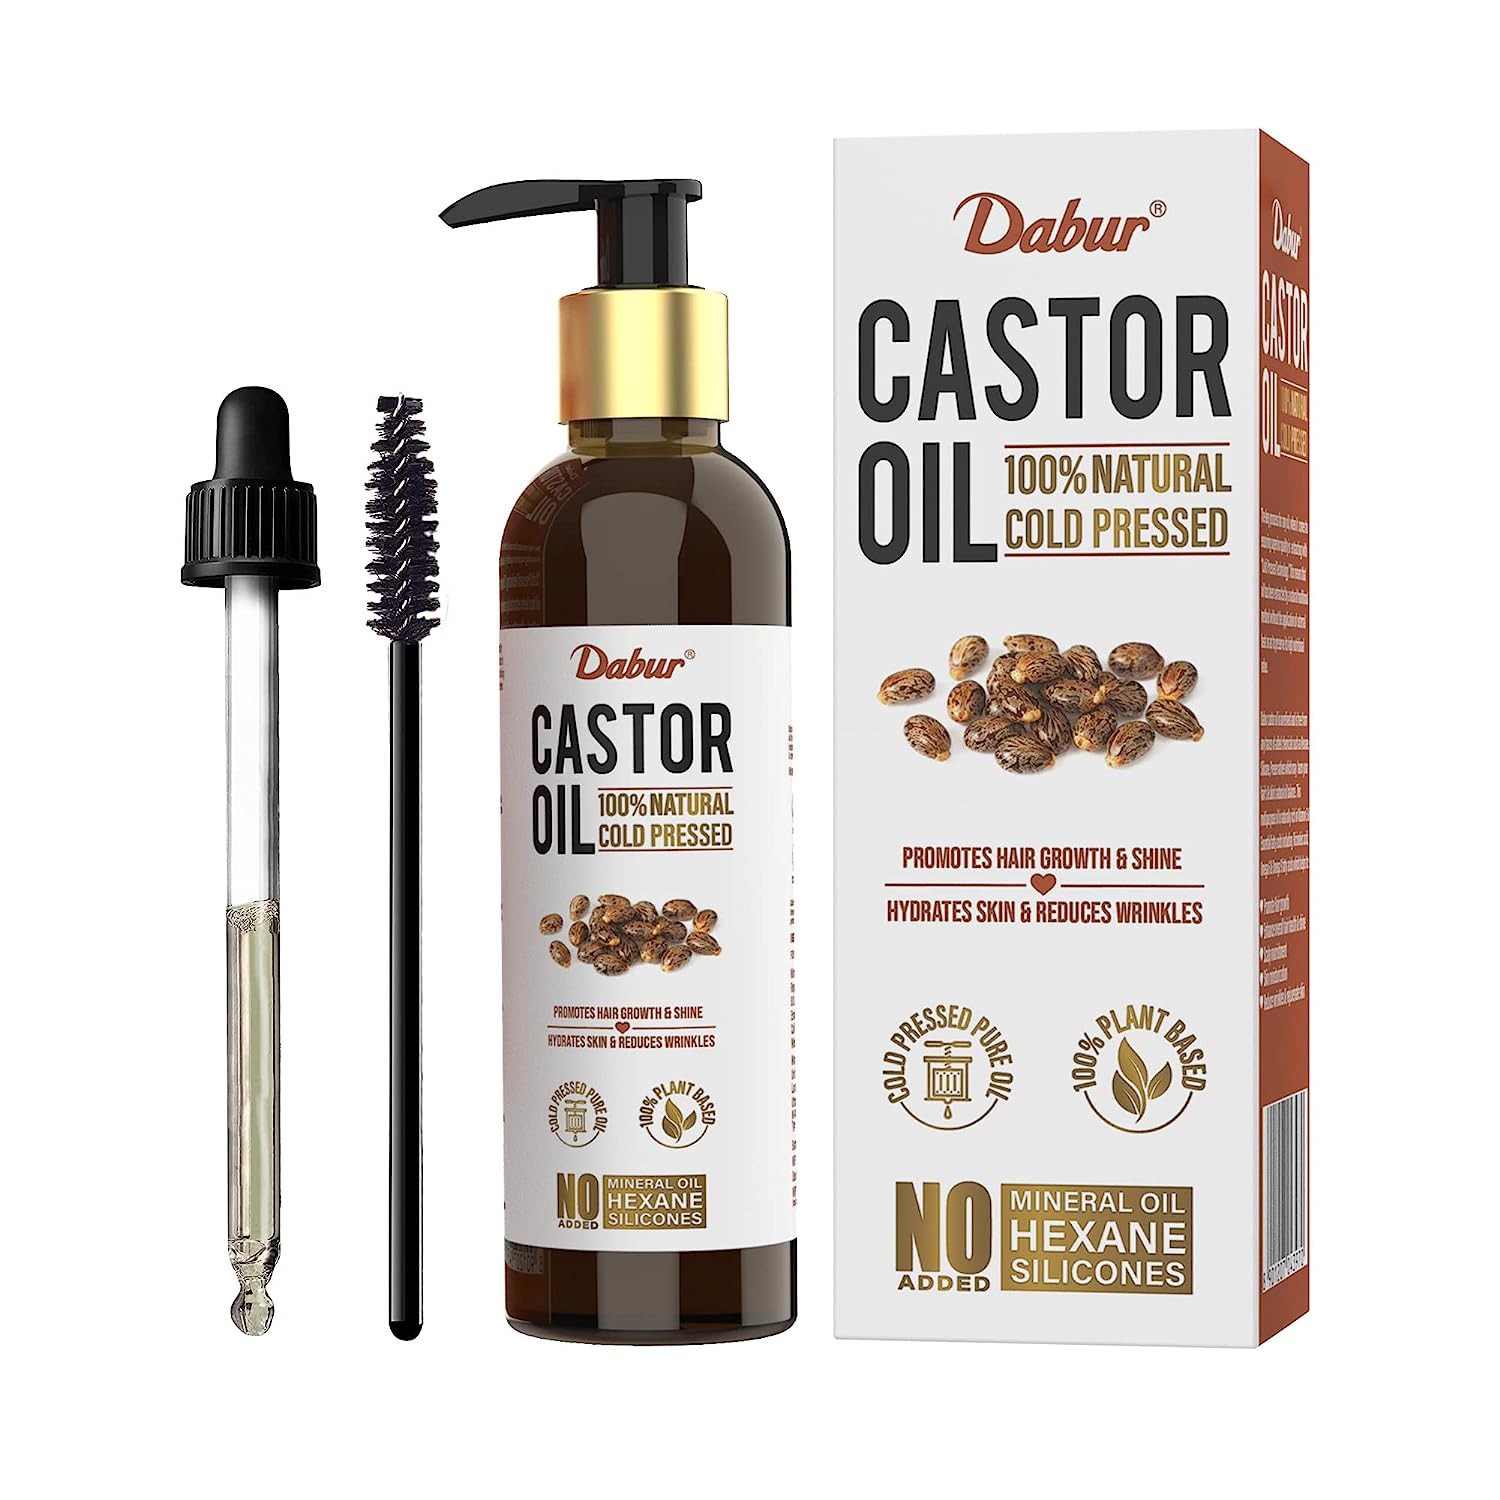 Dabur Castor Oil - 200ml | 100% Natural Cold Pressed Oil | Promotes Hair Growth, Hydrates Skin & Reduces Wrinkles | No Mineral Oil & Silicones